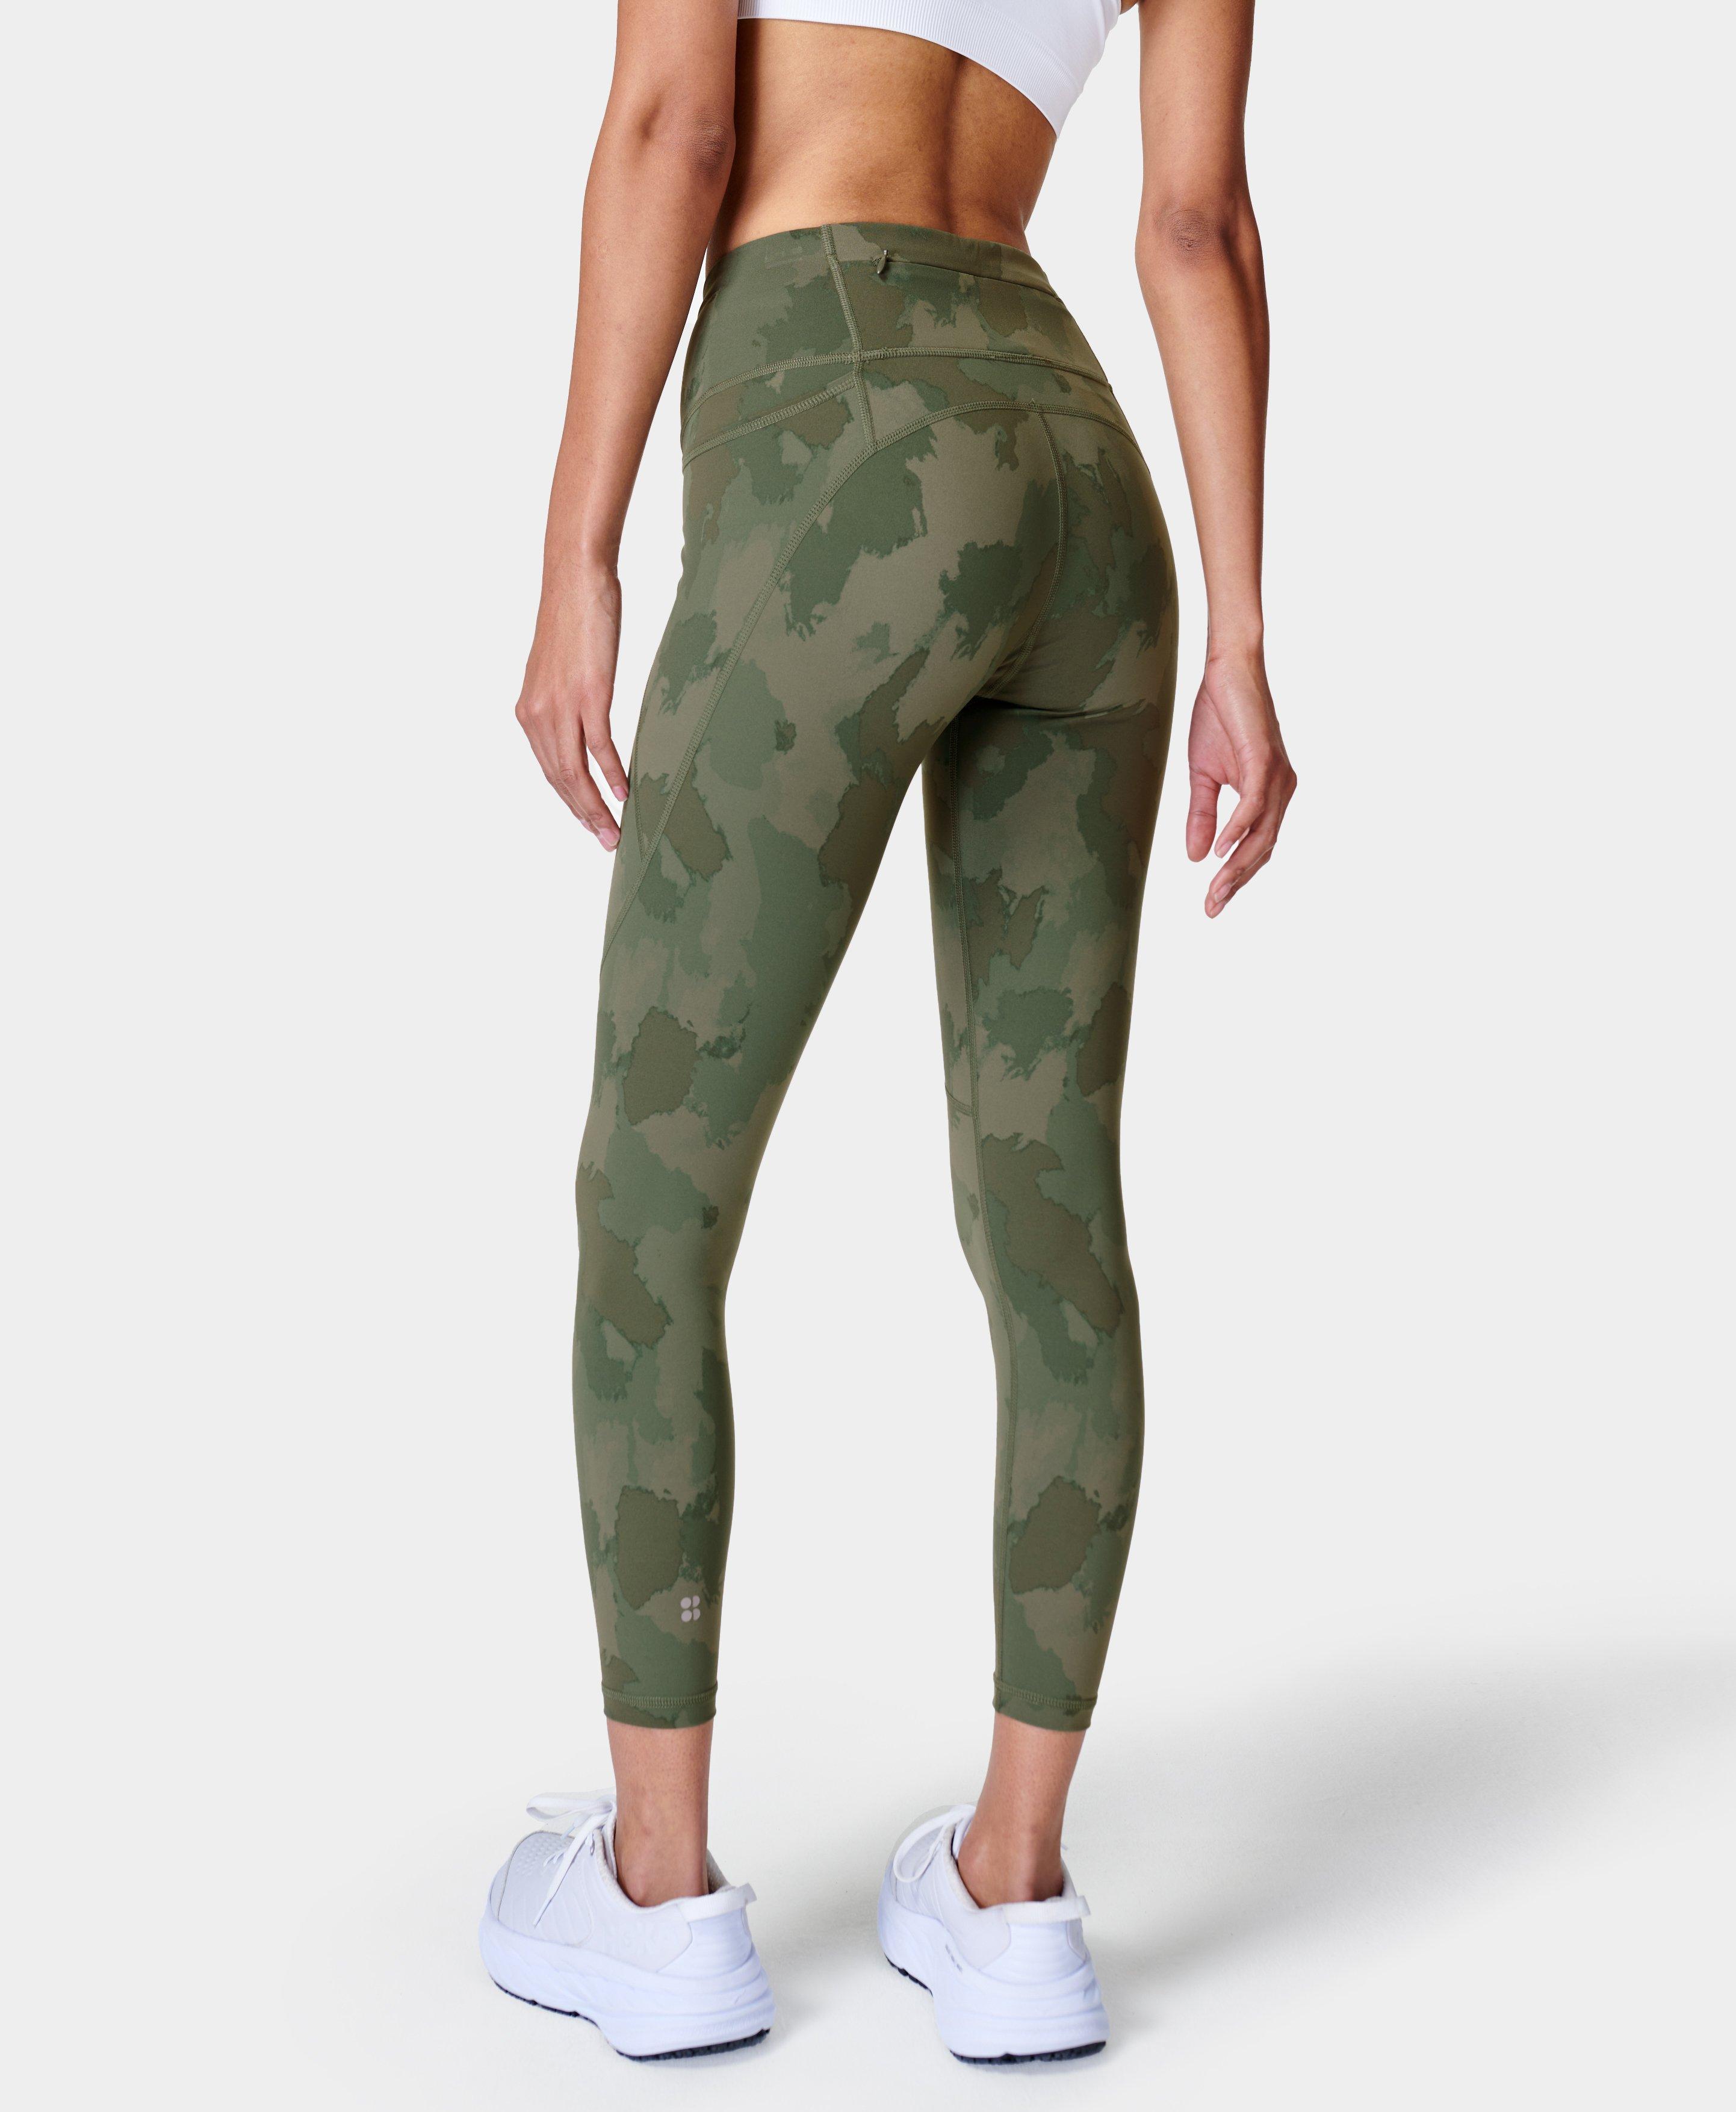 Are Printed Leggings In Style? – solowomen